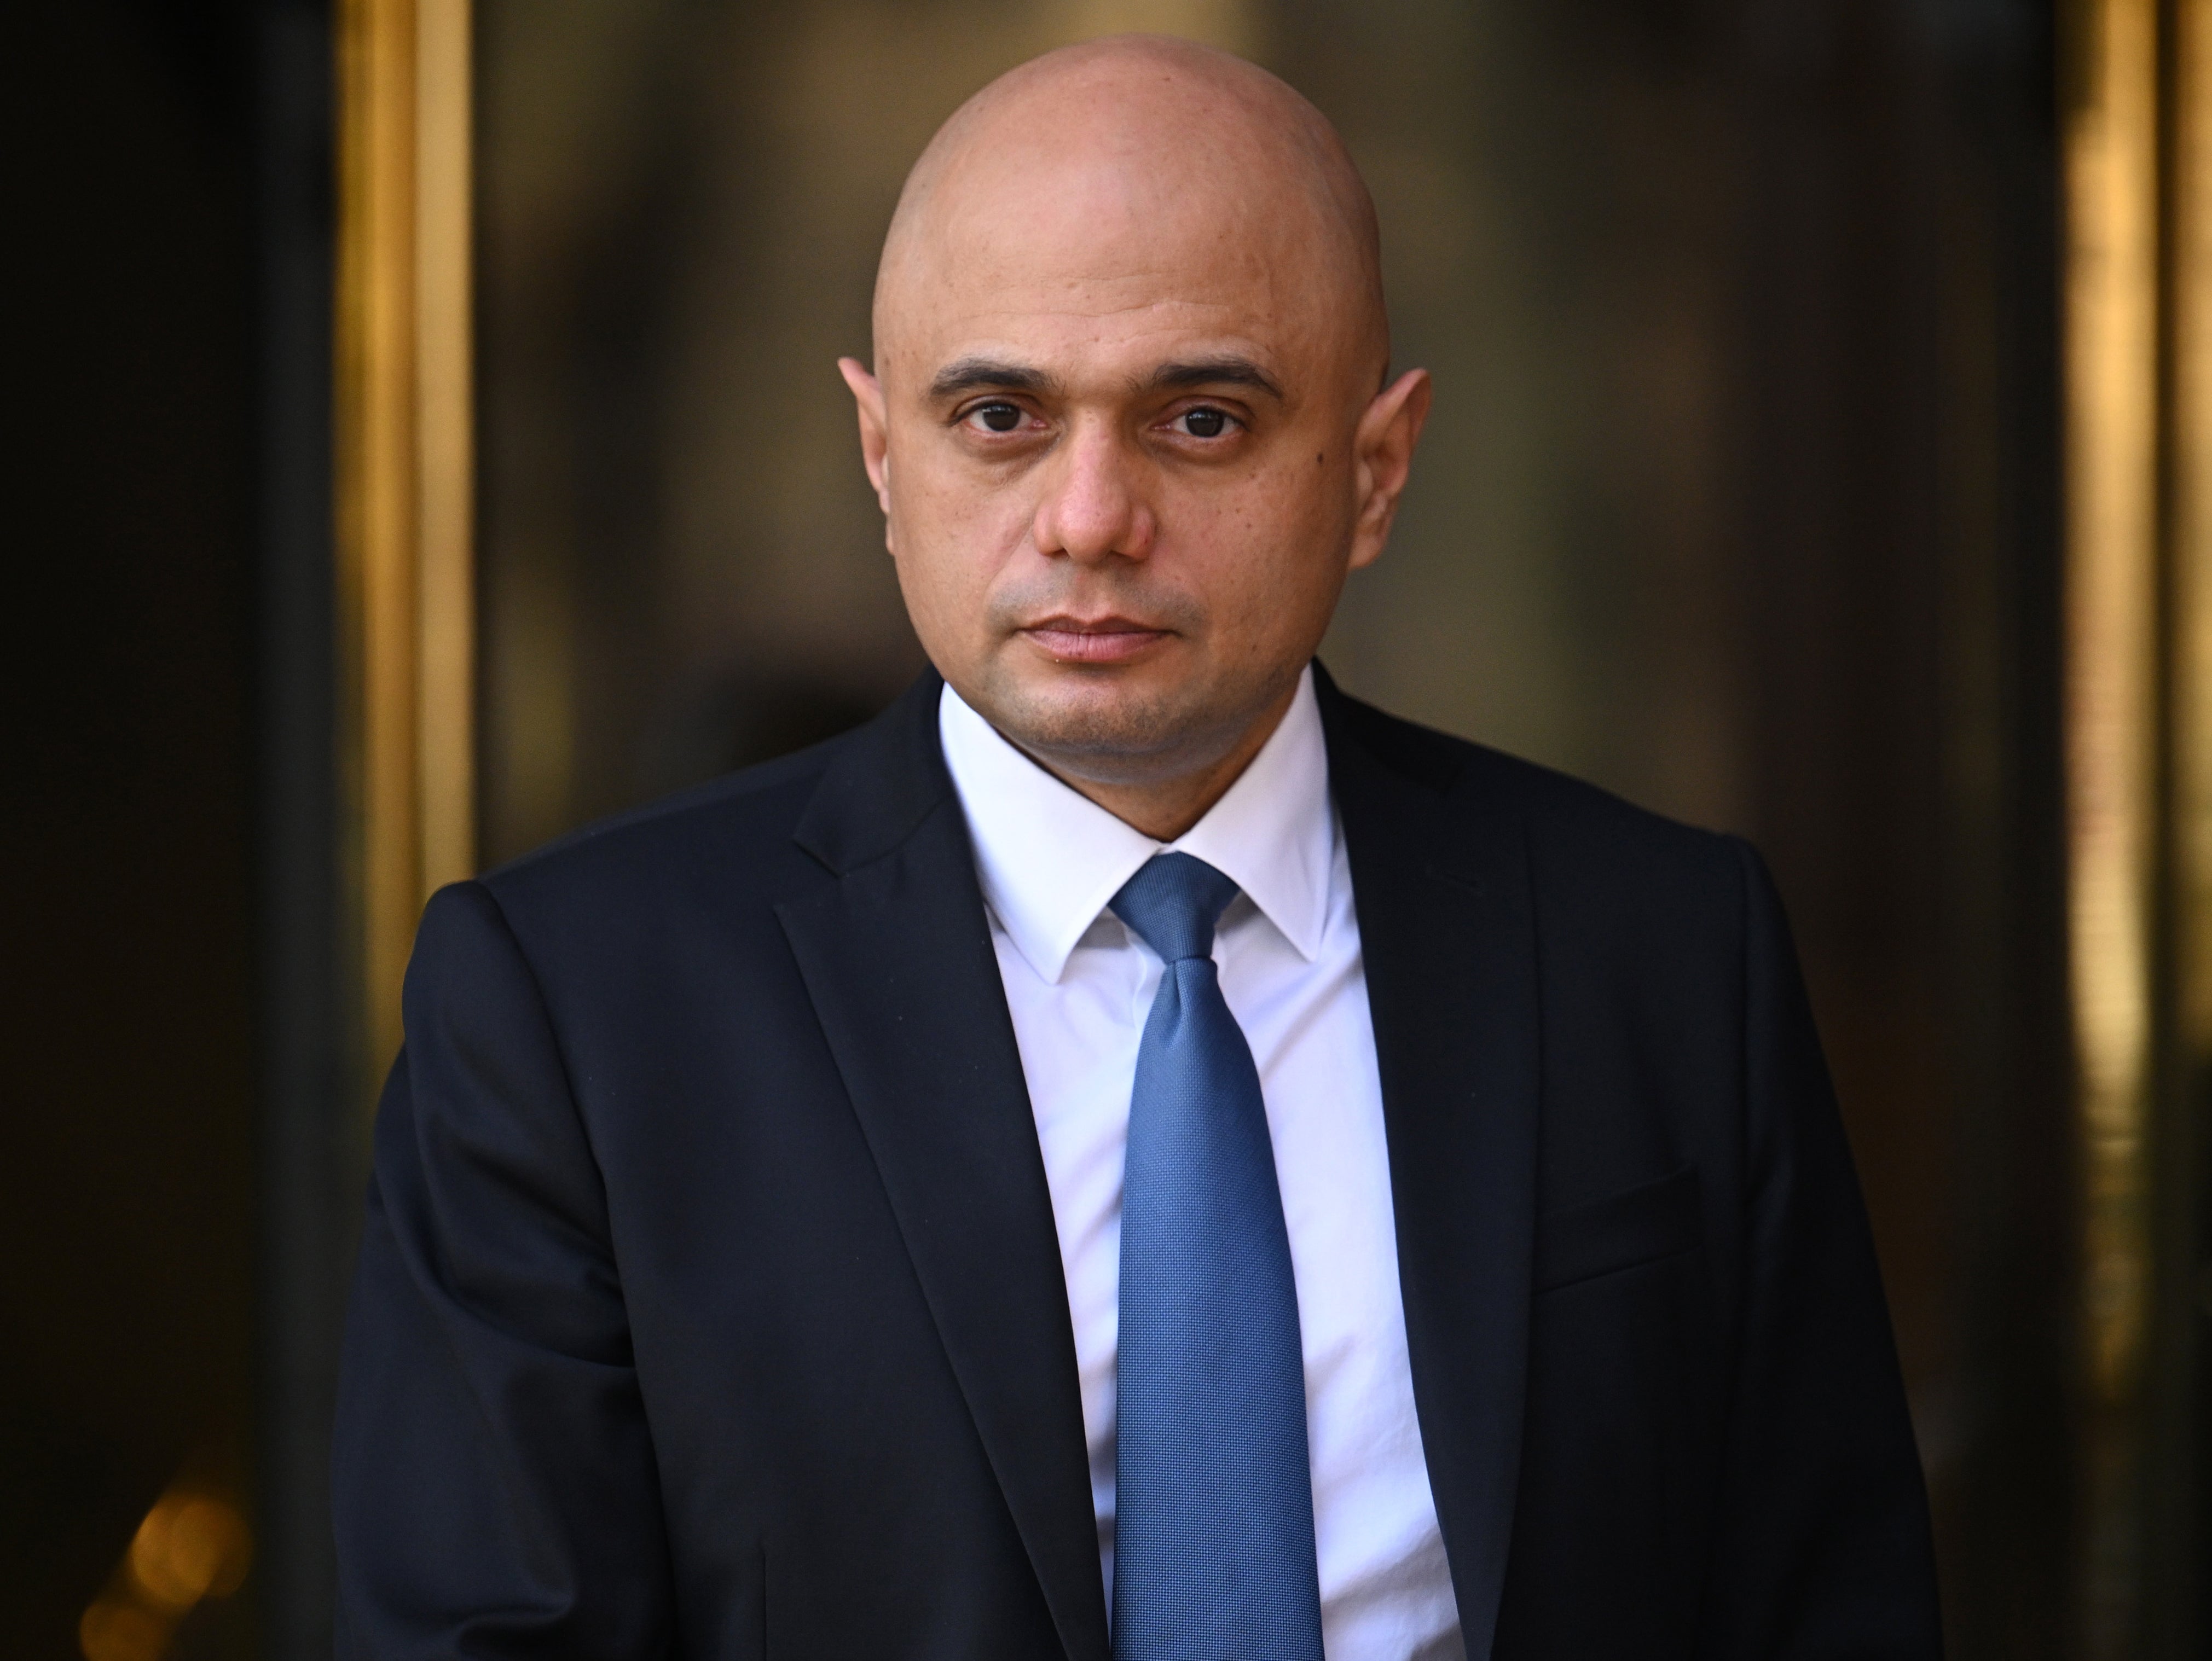 Health secretary Sajid Javid wants the NHS to sever contracts with Russia’s gas giant